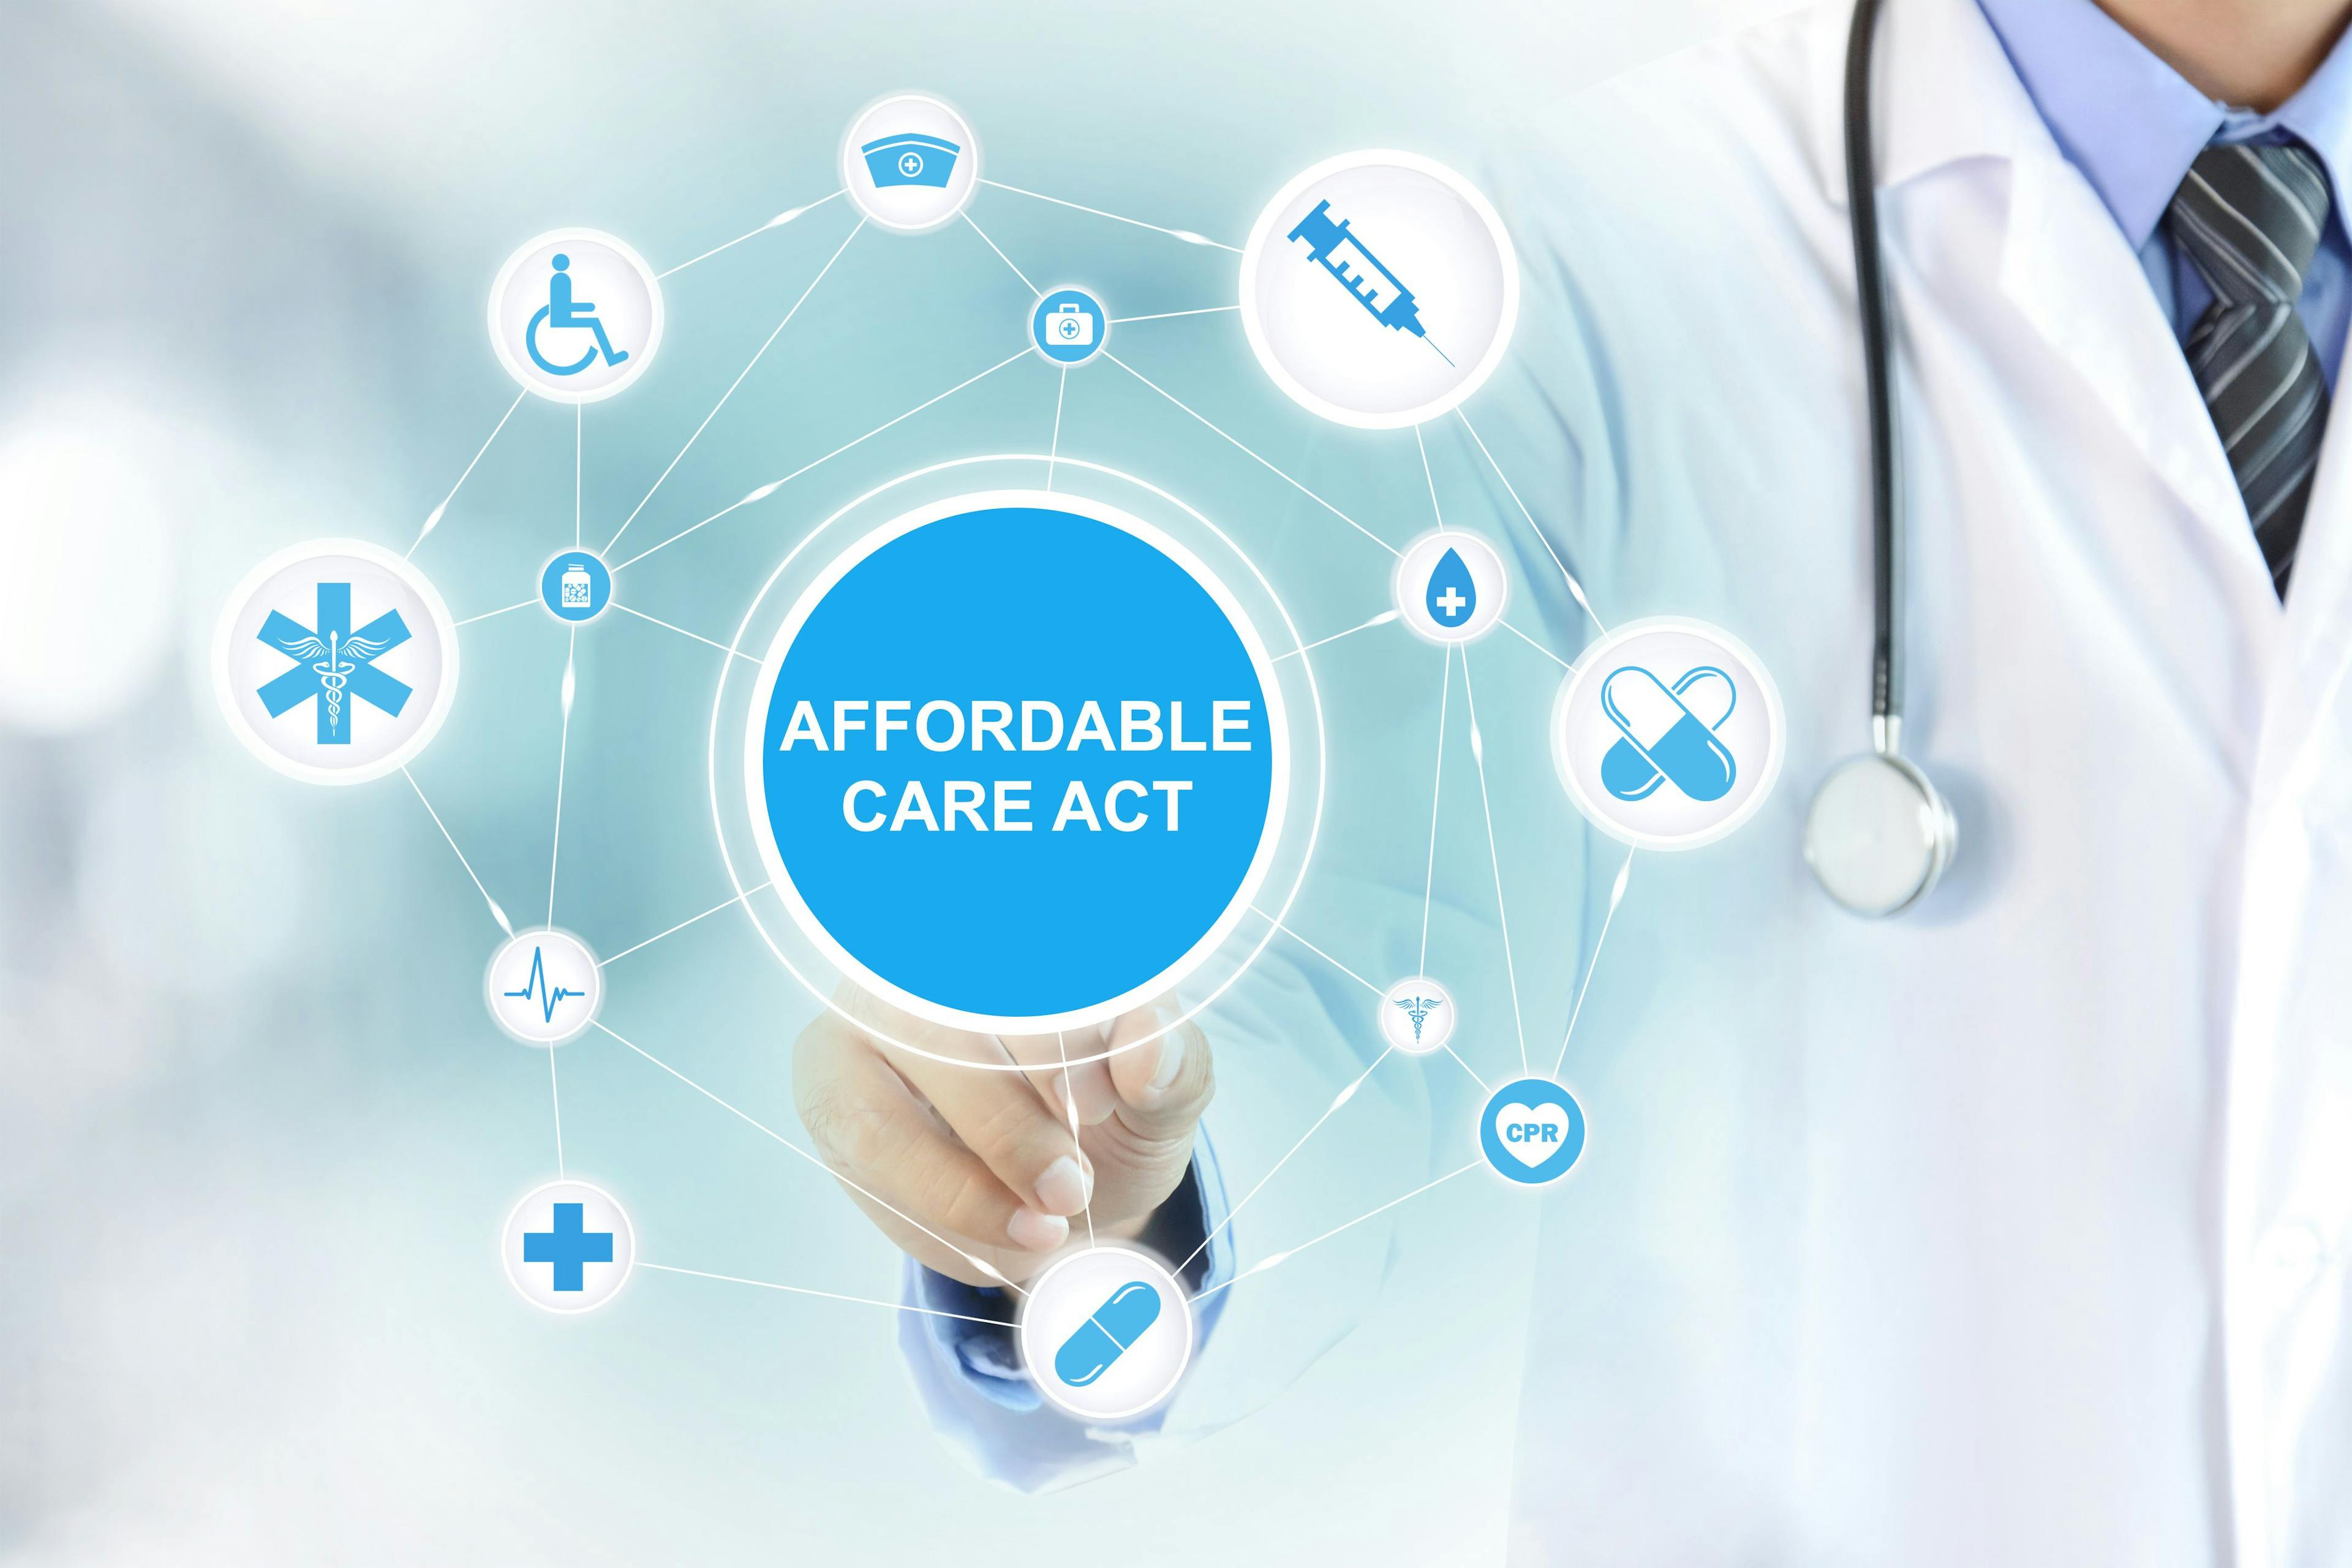 AFFORDABLE CARE ACT | Image credit: Atstock Productions-stock.adobe.com